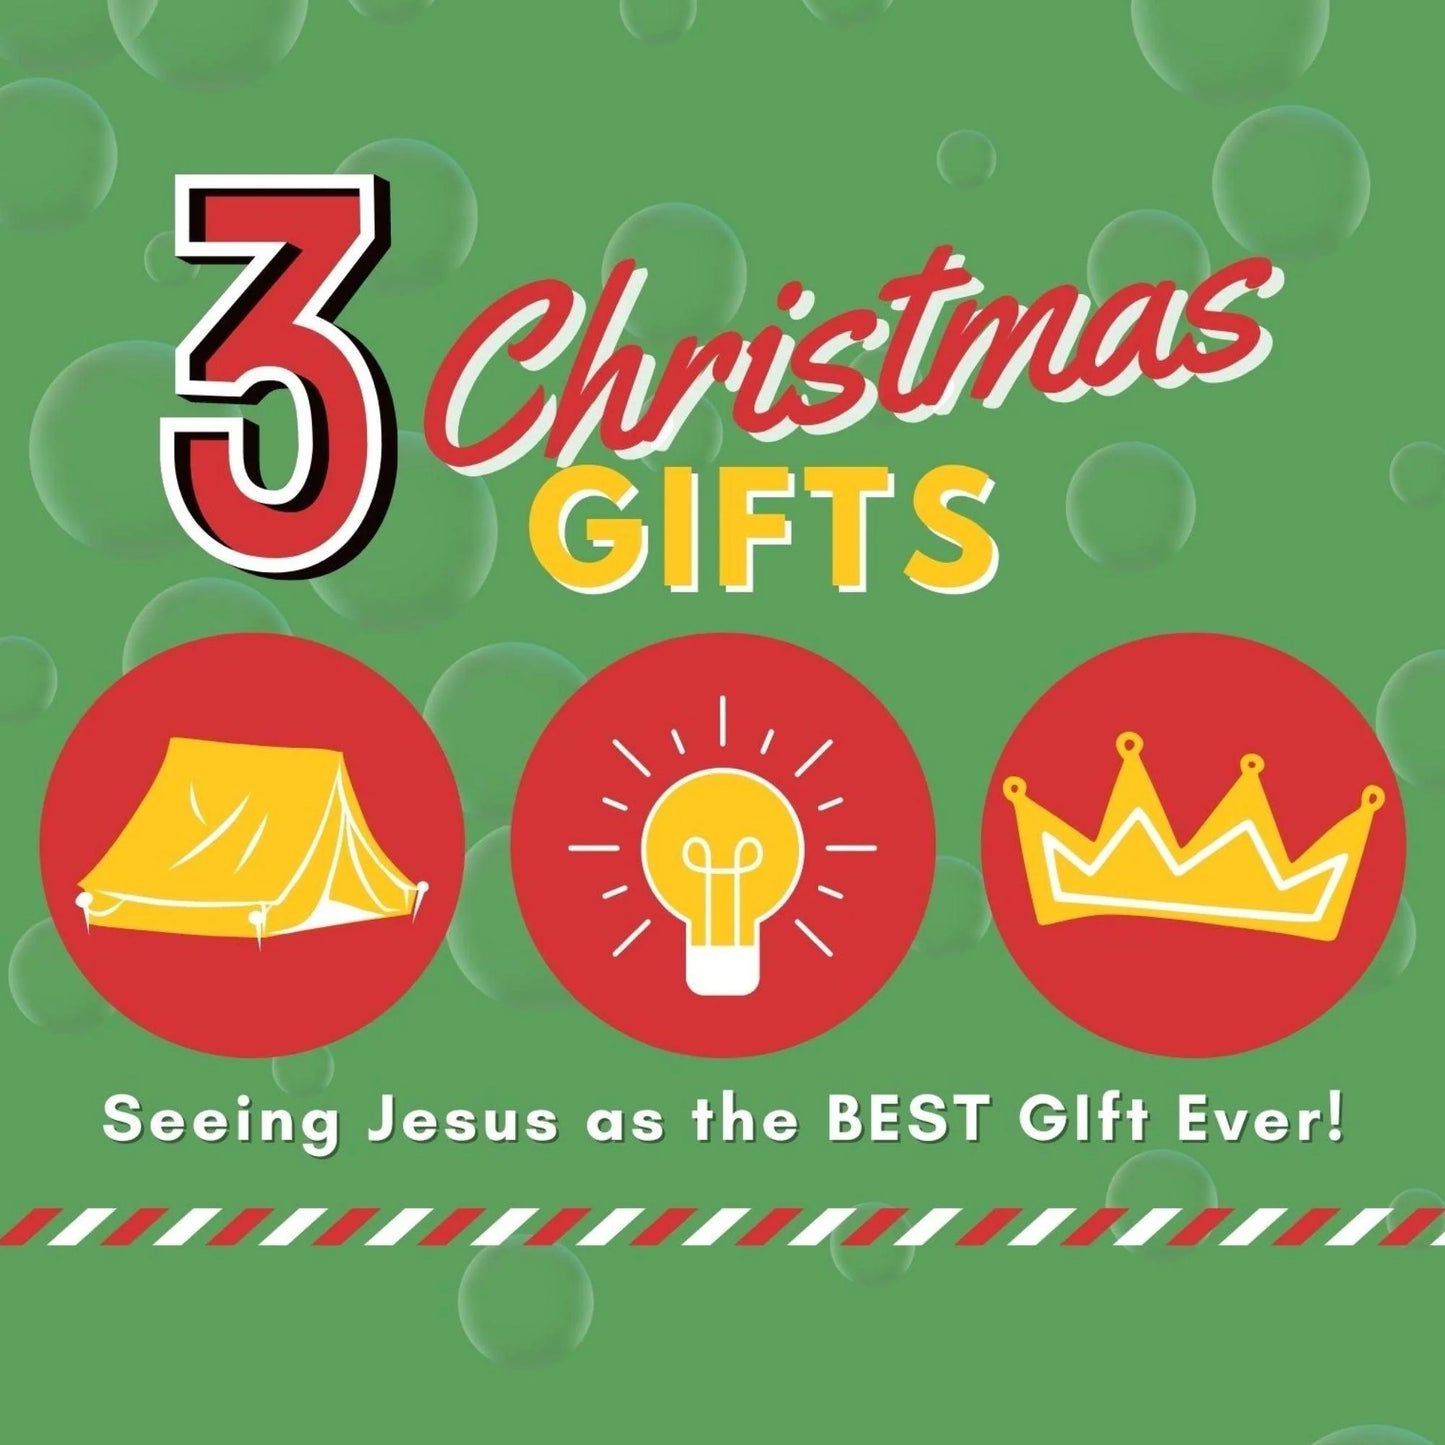 3 Christmas Gifts - 3-Week Bible Lessons for ages 5-12